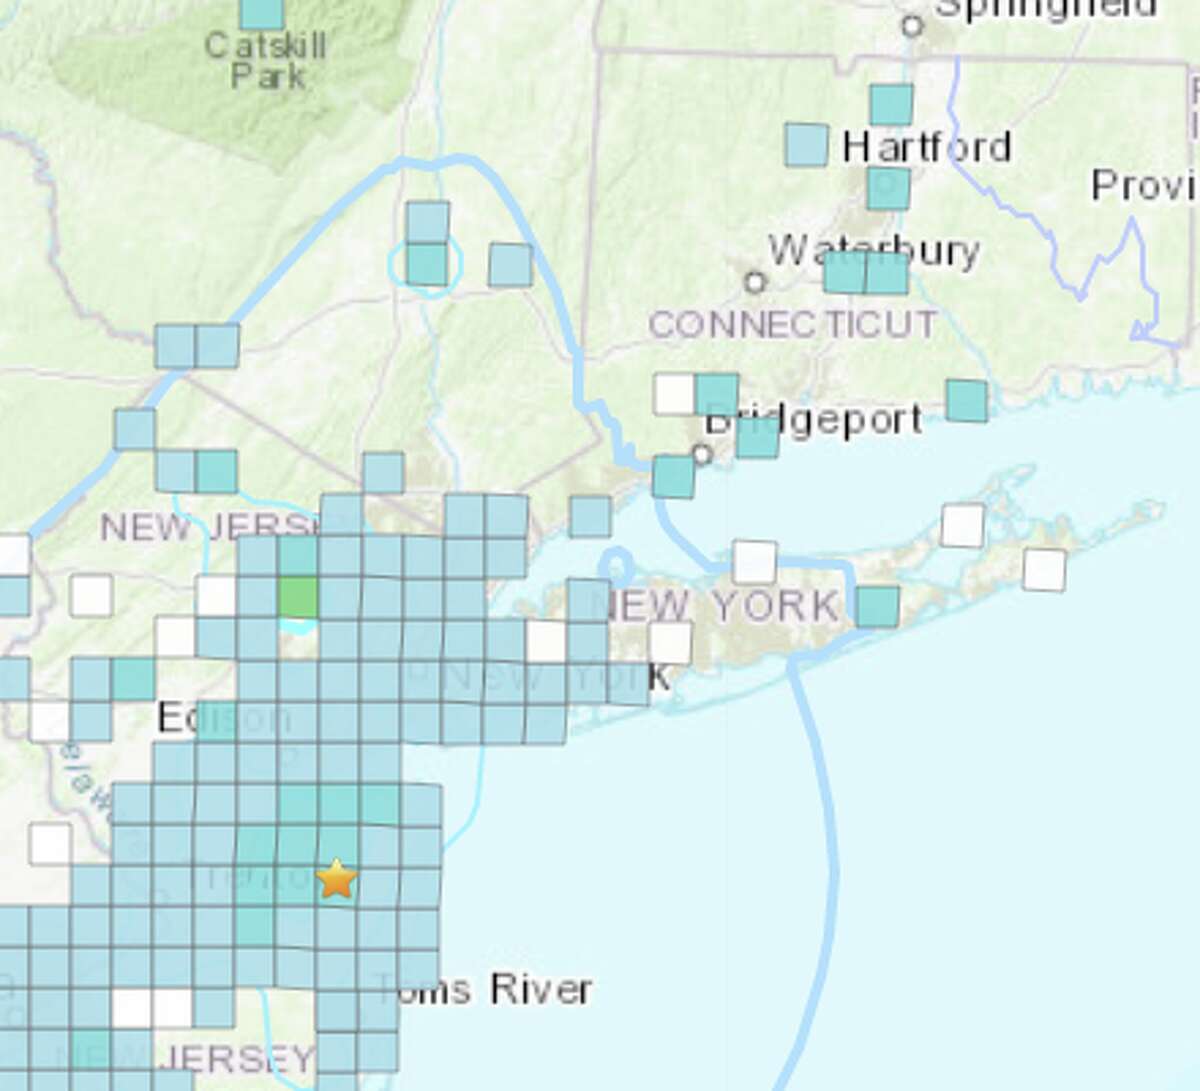 According to the "Did you feel it?" map from the USGS, instances of minor shaking were reported primarily in southern Fairfield County. However, shaking as a result of the earthquake was also reported as far as Hartford, which sits 142 miles away from the epicenter. Despite the wide radius of the quake, it only produced weak or light shaking according to the USGS. “It would be very surprising for us to see anything more than you know, damaged shelves or picture frames falling off of windows,” Robert Sanders, a USGS geophysicist, told the AP.